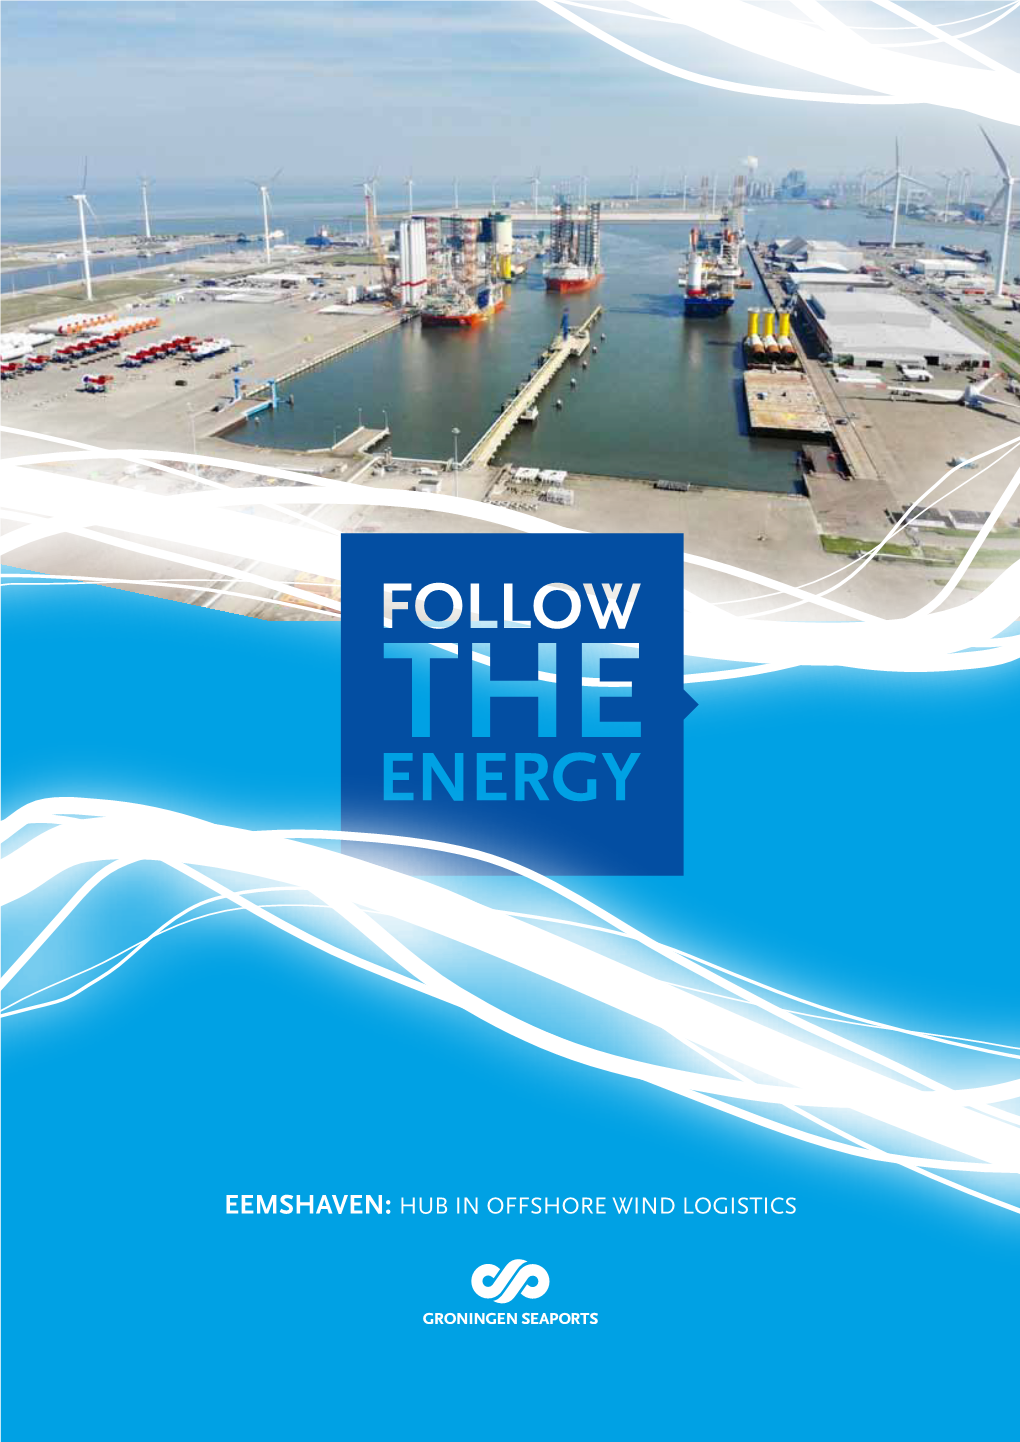 EEMSHAVEN: HUB in OFFSHORE WIND LOGISTICS EEMSHAVEN MEETS GOALS | PLANNING MARITIME REQUIREMENTS up to 2030 OFFSHORE WIND INDUSTRY • Draught: 7.5 - 14 M